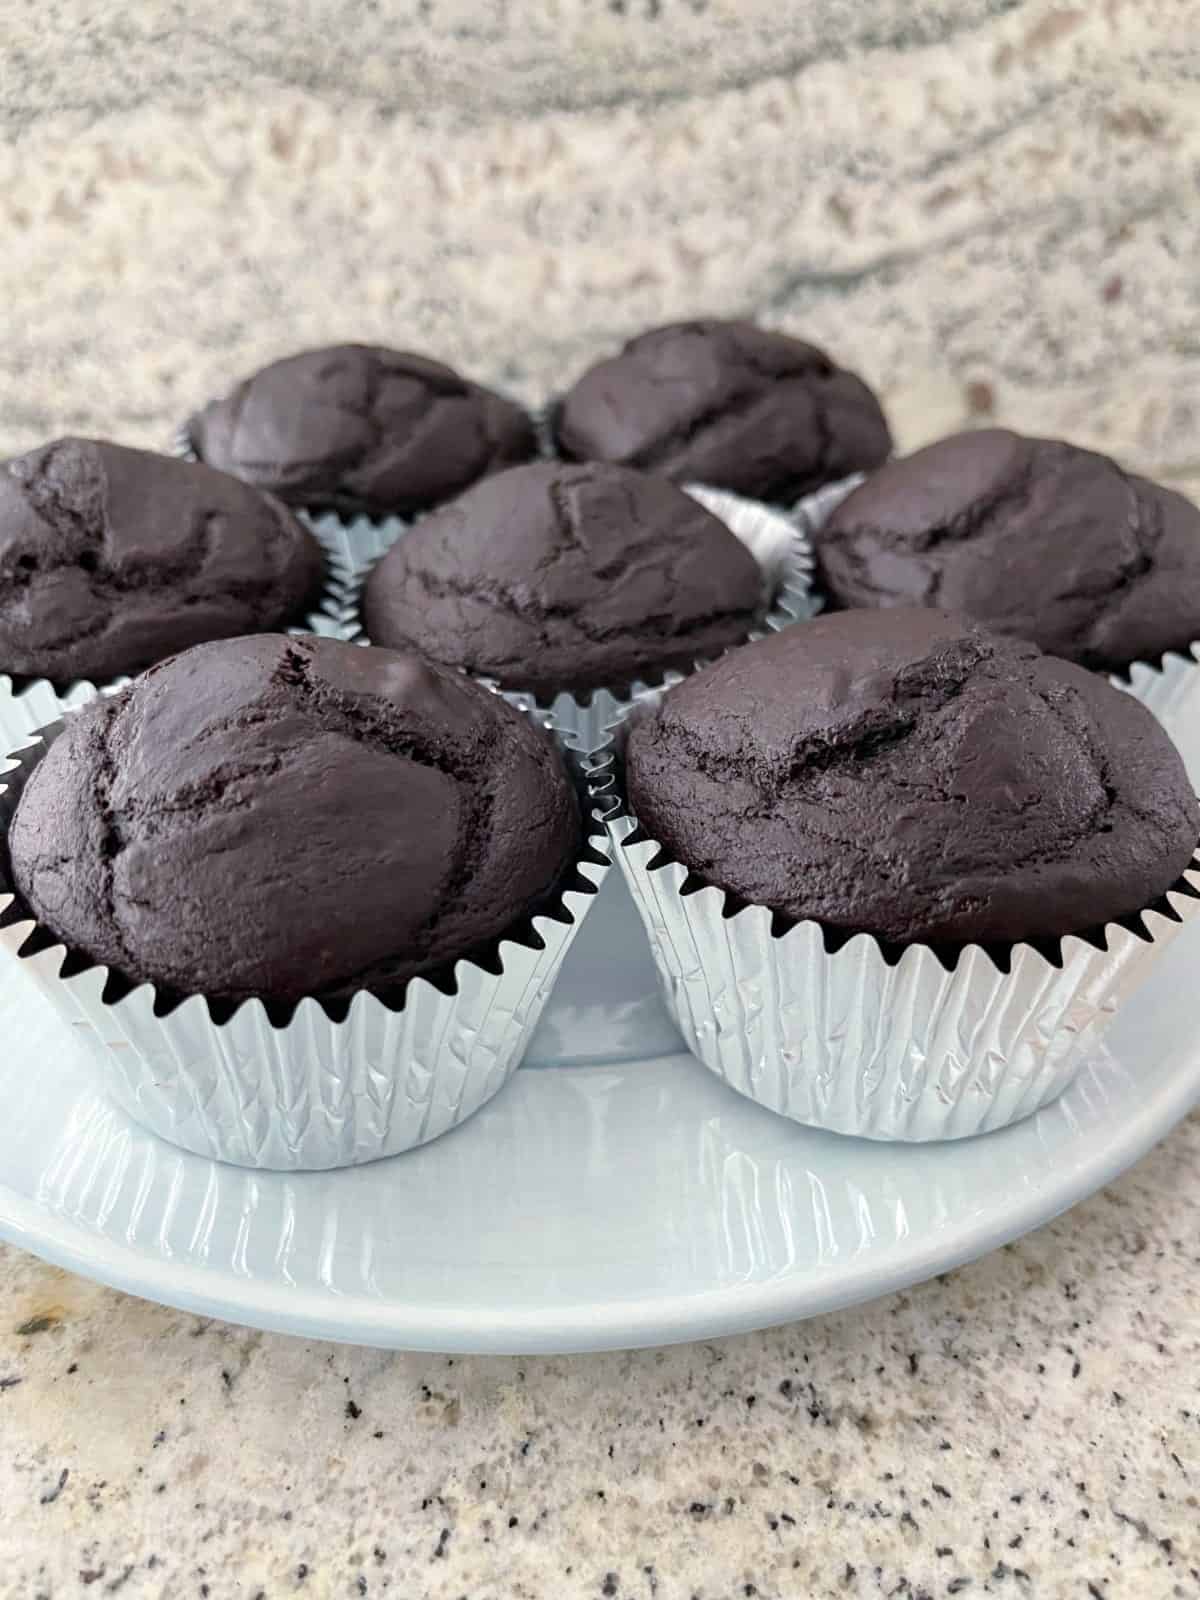 90-calorie chocolate cupcakes on small blue serving platter.